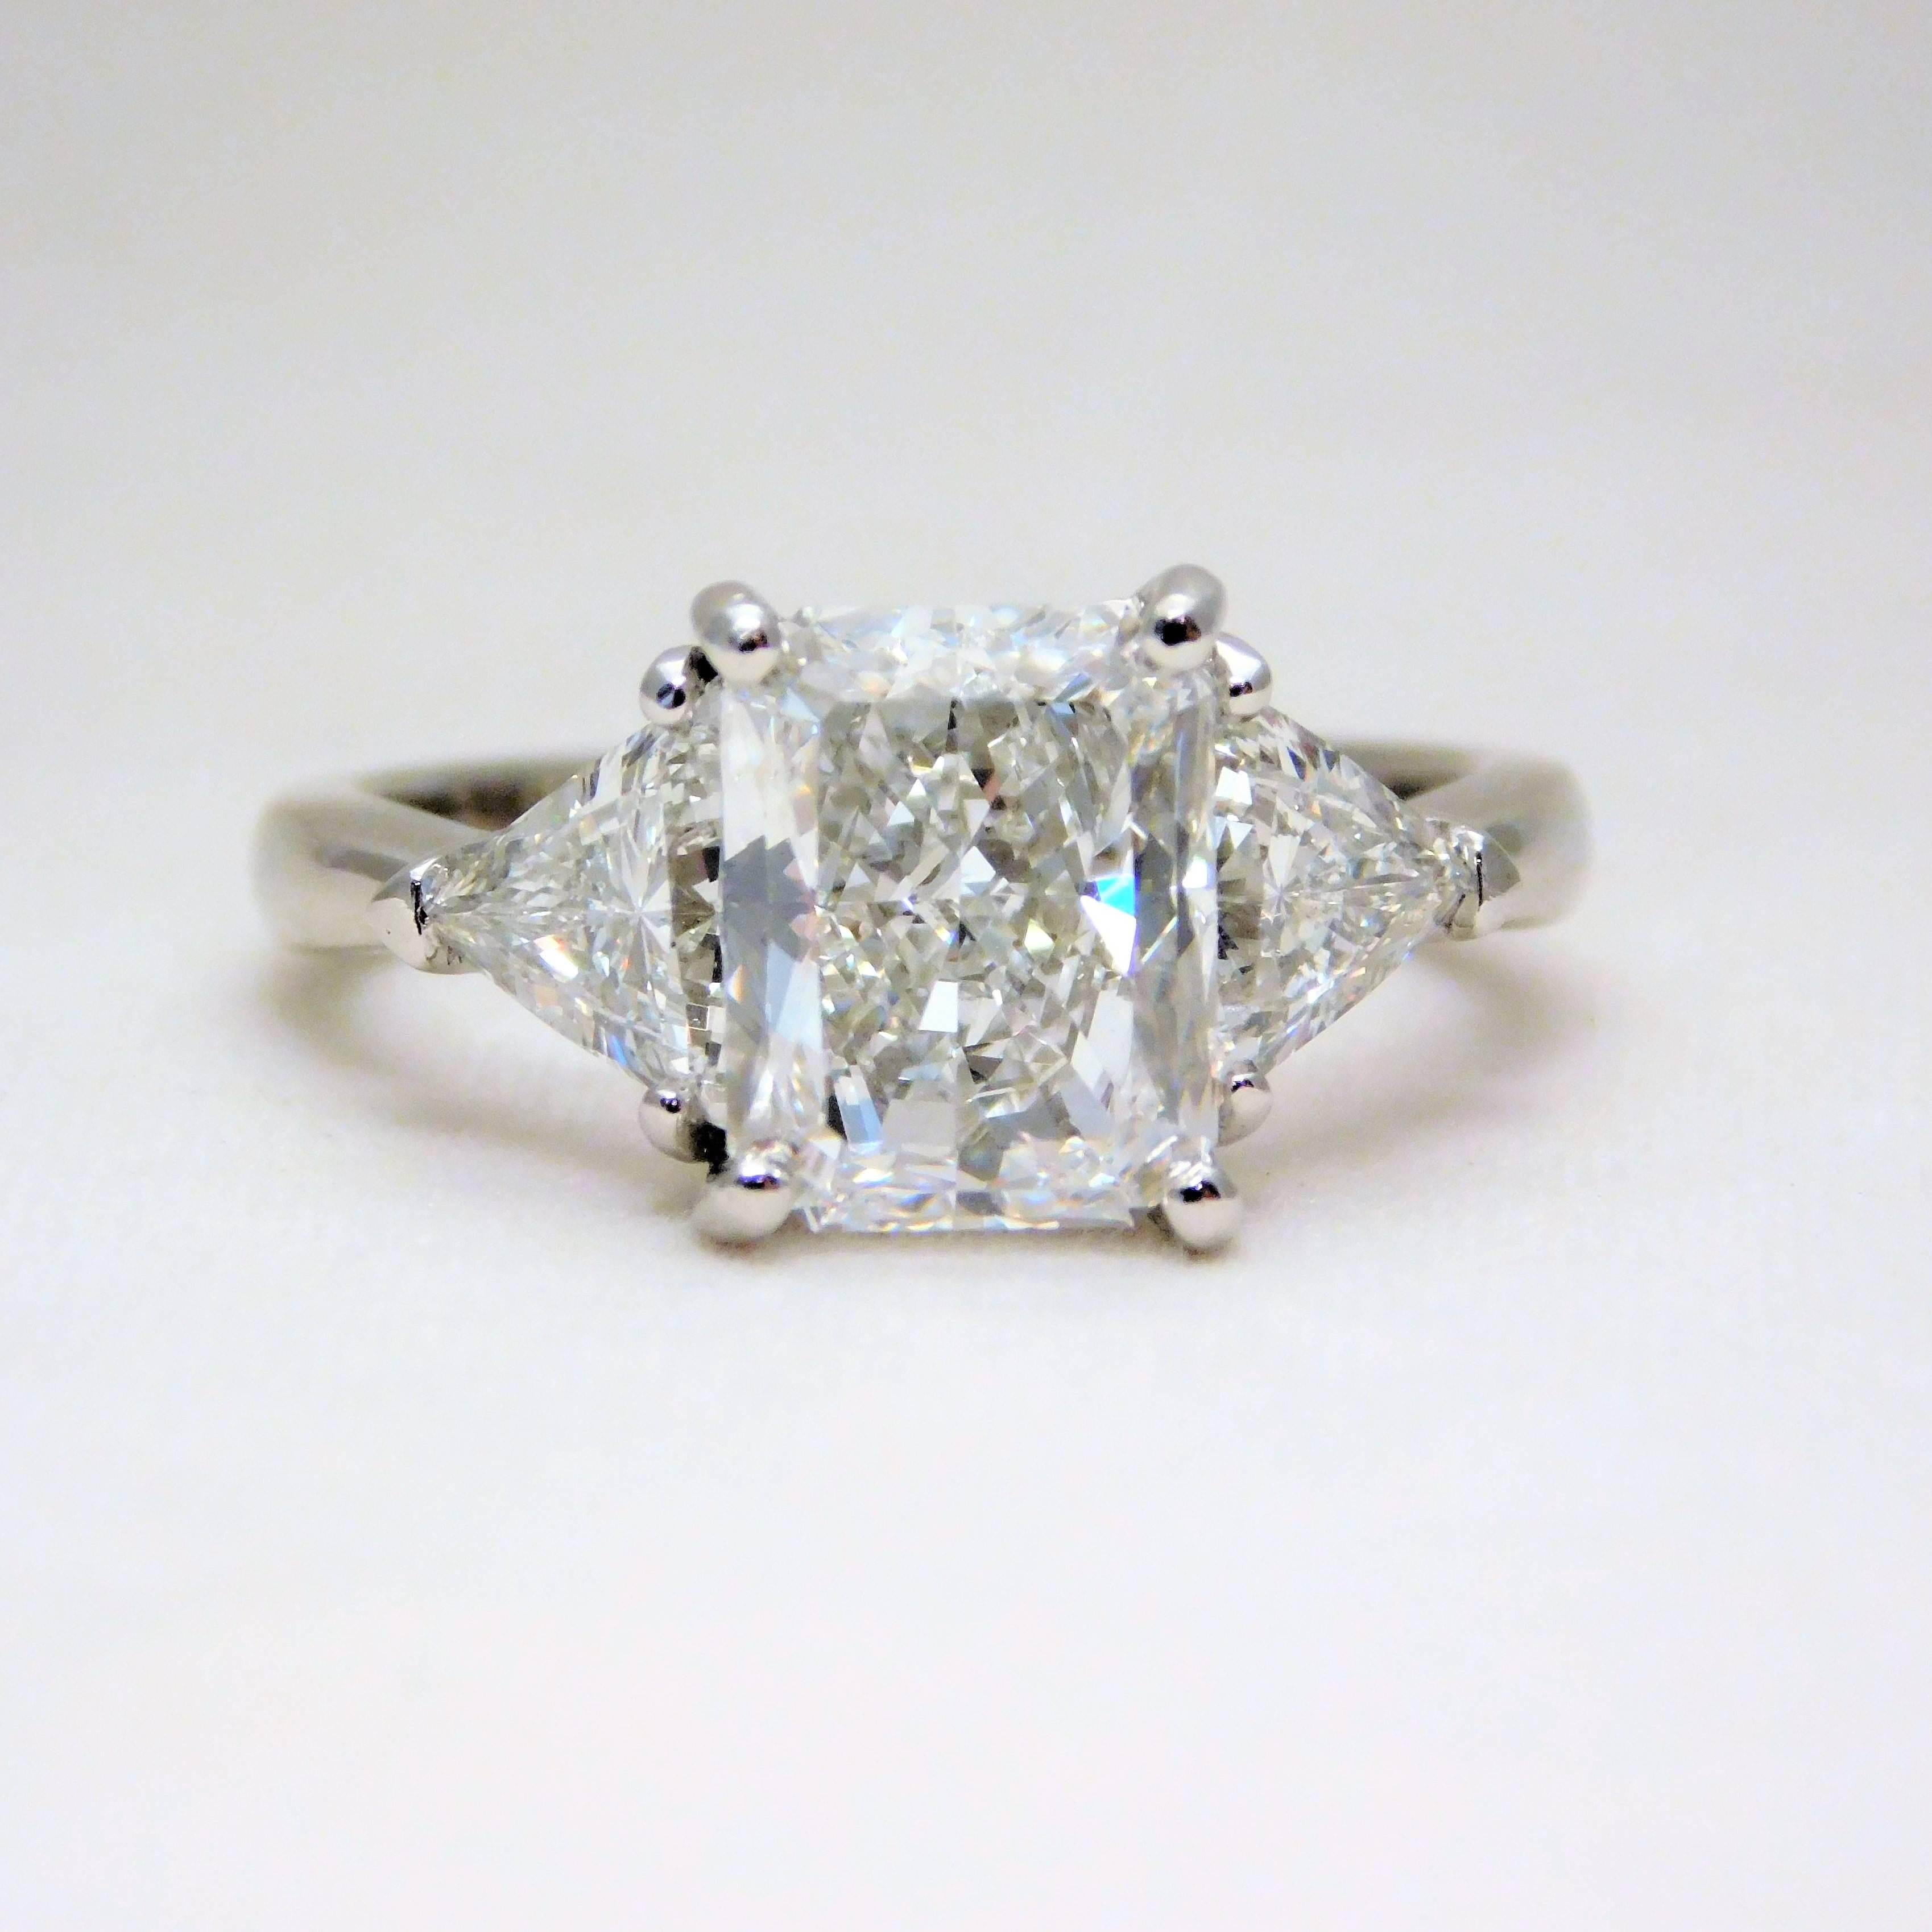 GIA Certified Perfect “D” Color 3ct Radiant-Cut Platinum Diamond Engagement Ring

One of the greatest diamonds we have ever seen hand set by one of our elite bench jewelers.  This isn’t your typical engagement ring.  This dazzling masterpiece is